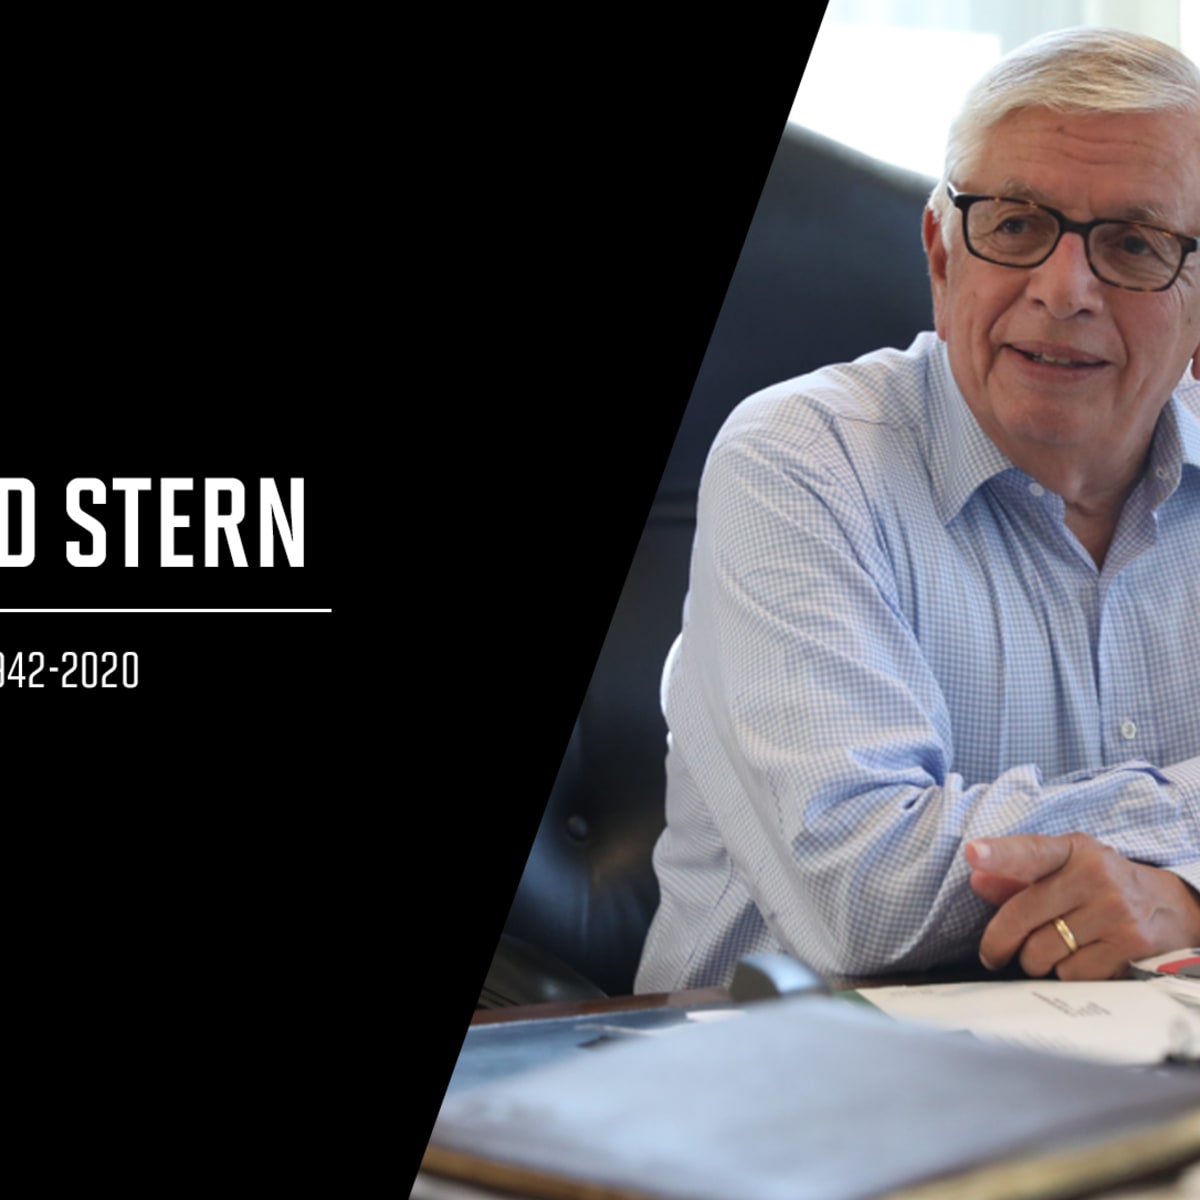 NBA Commissioner David Stern Editorial Image - Image of david, papers:  80101685